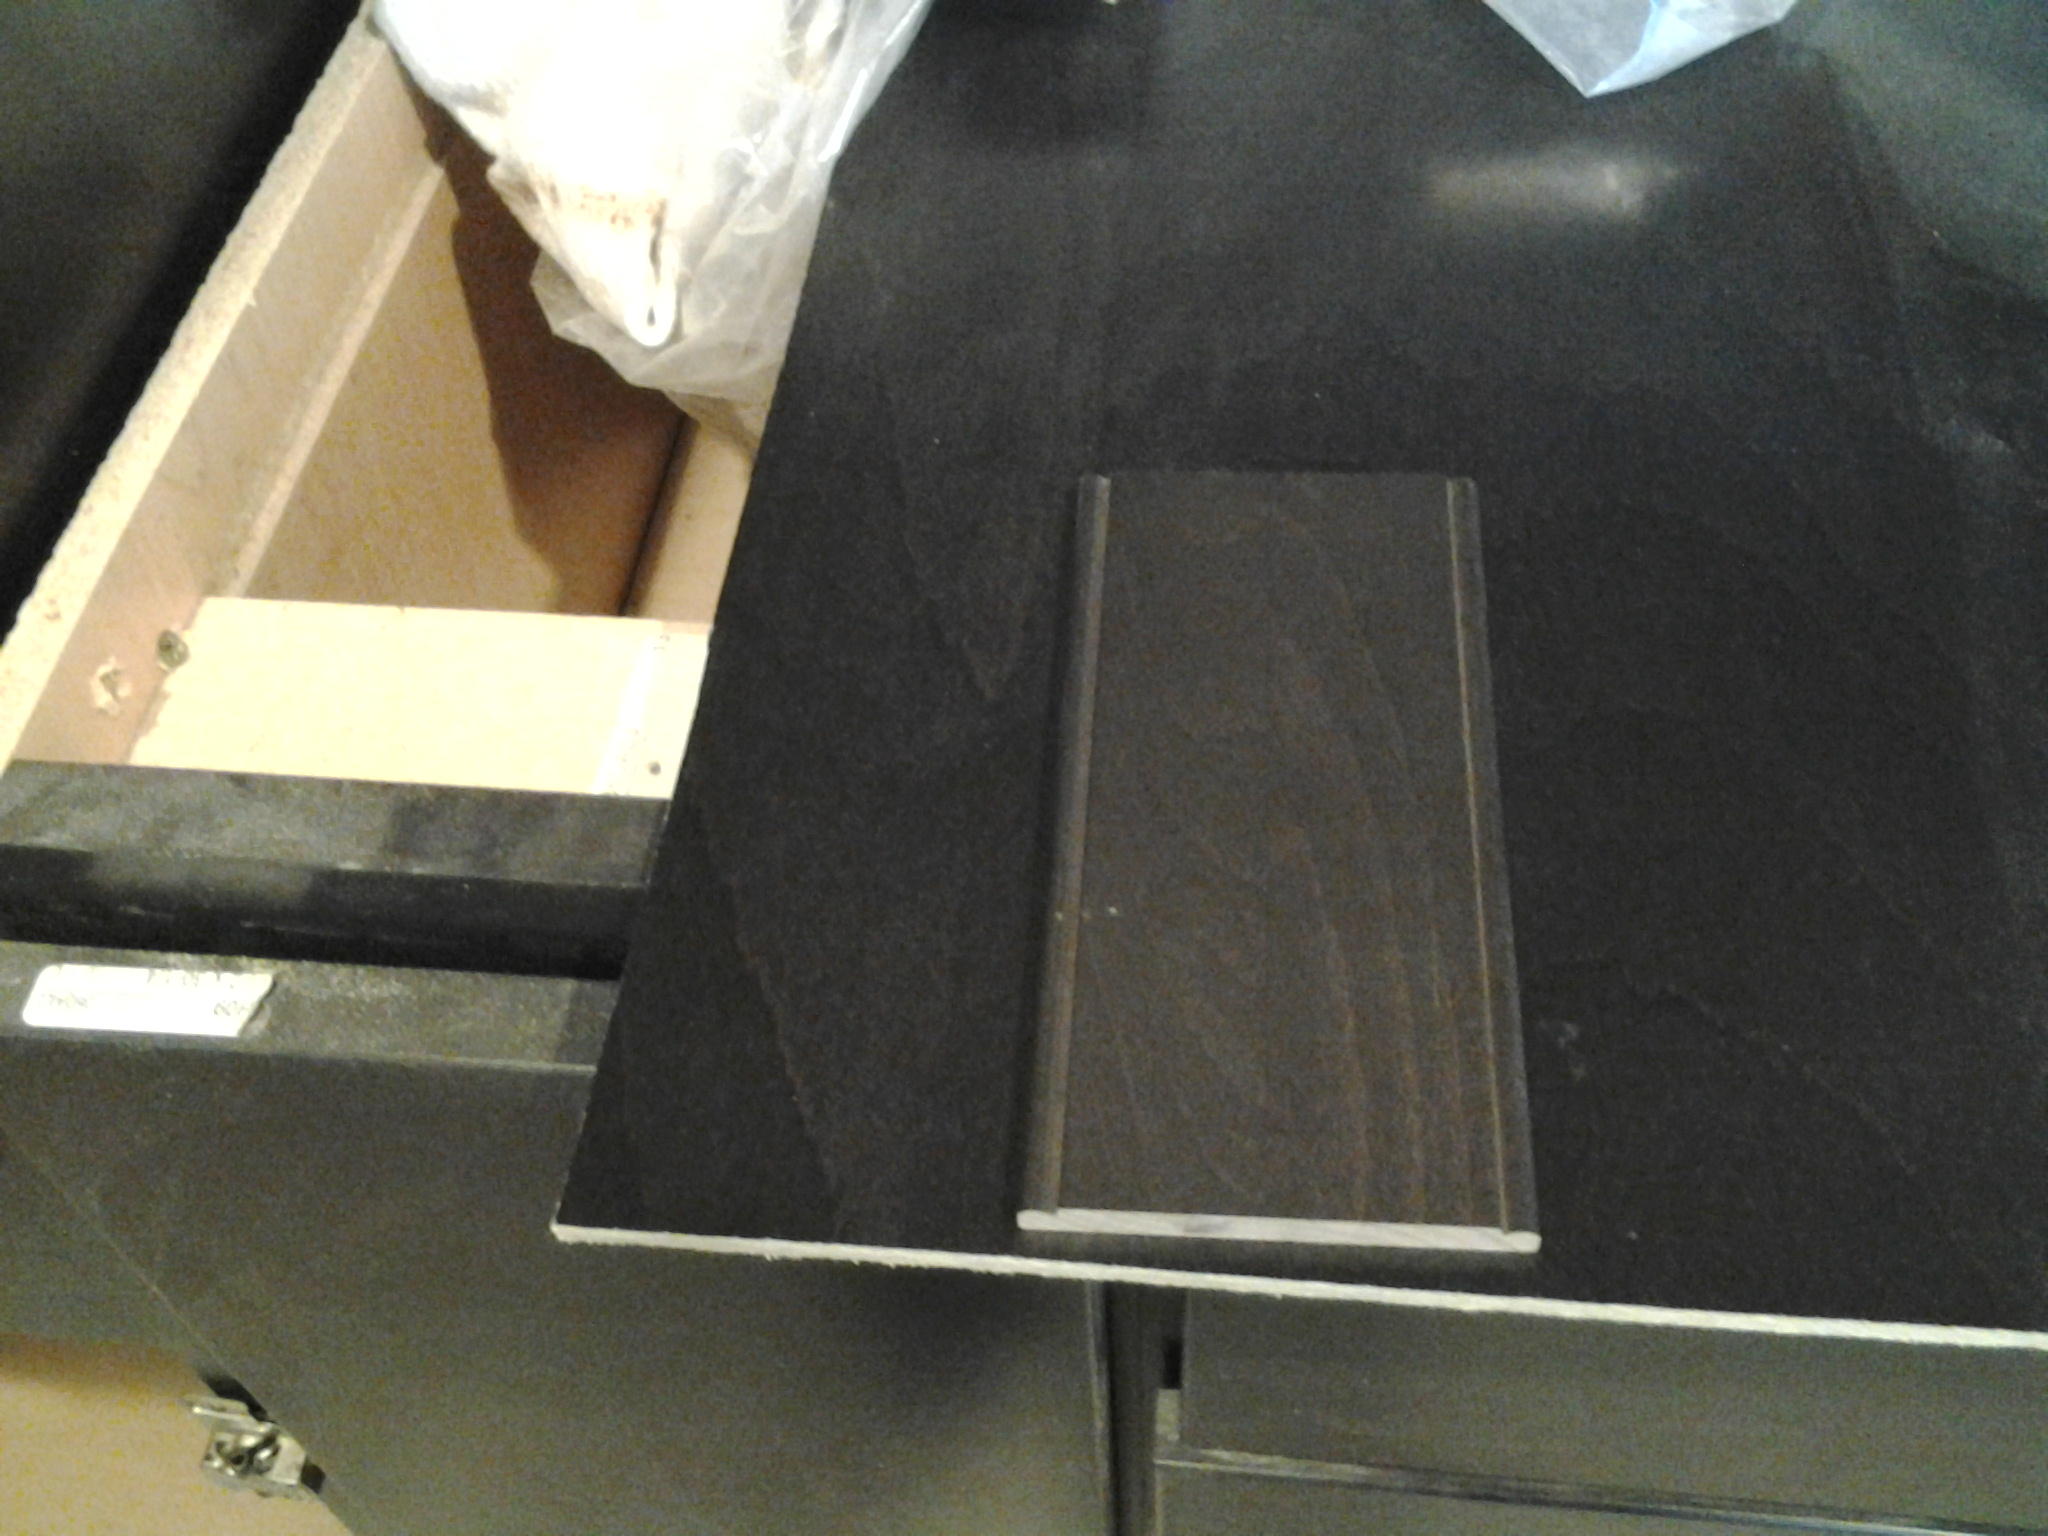 Cabinet Maker Screwed Up Cabinet Stain Badly Denies Wrongdoing